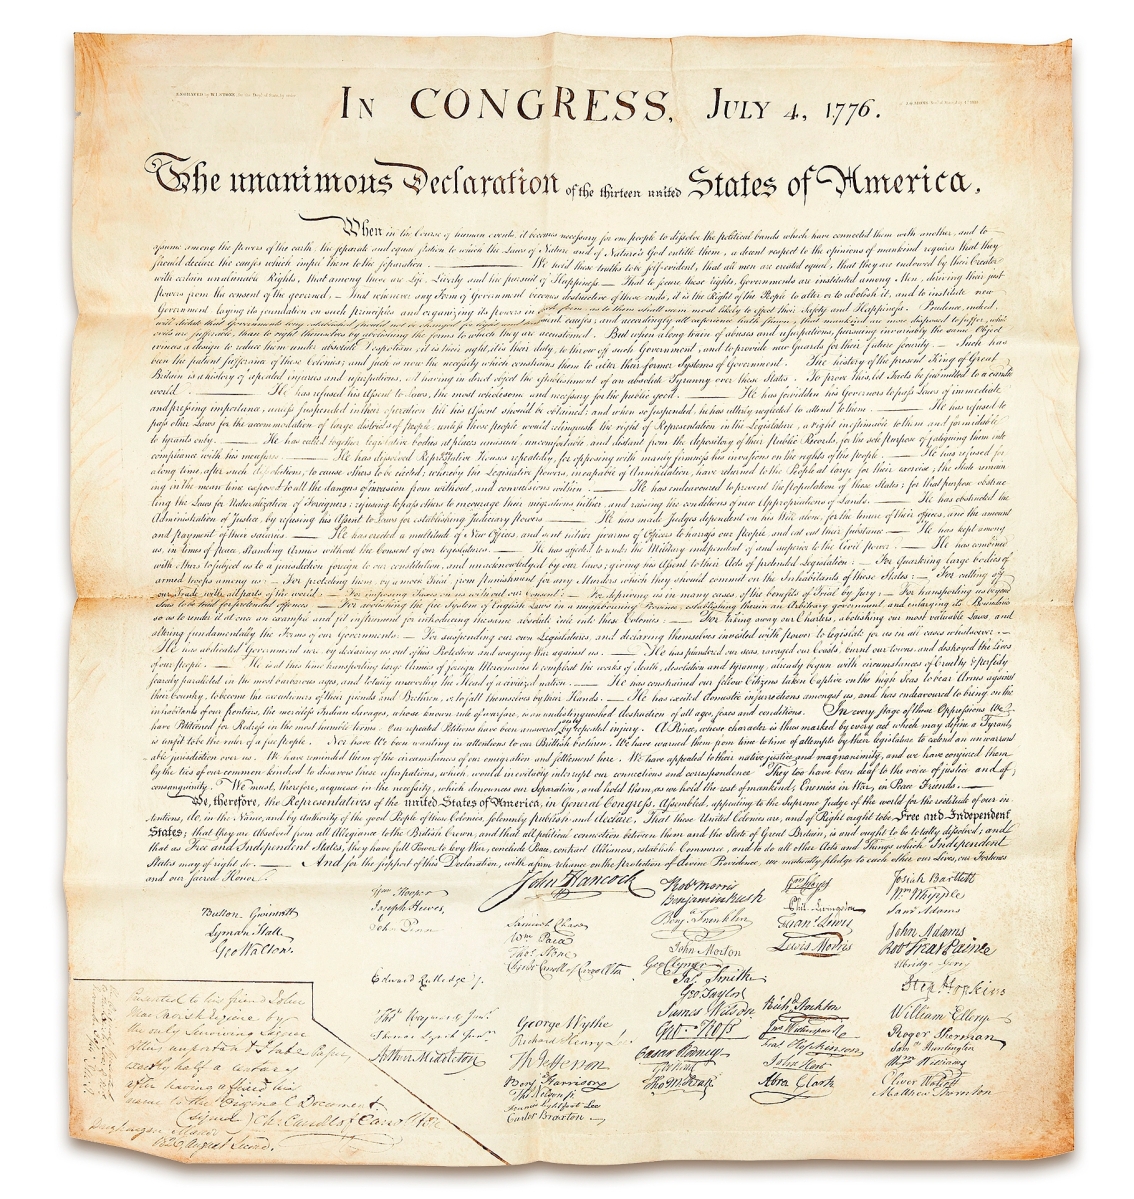 Charles Carroll’s copy of the Declaration of Independence.